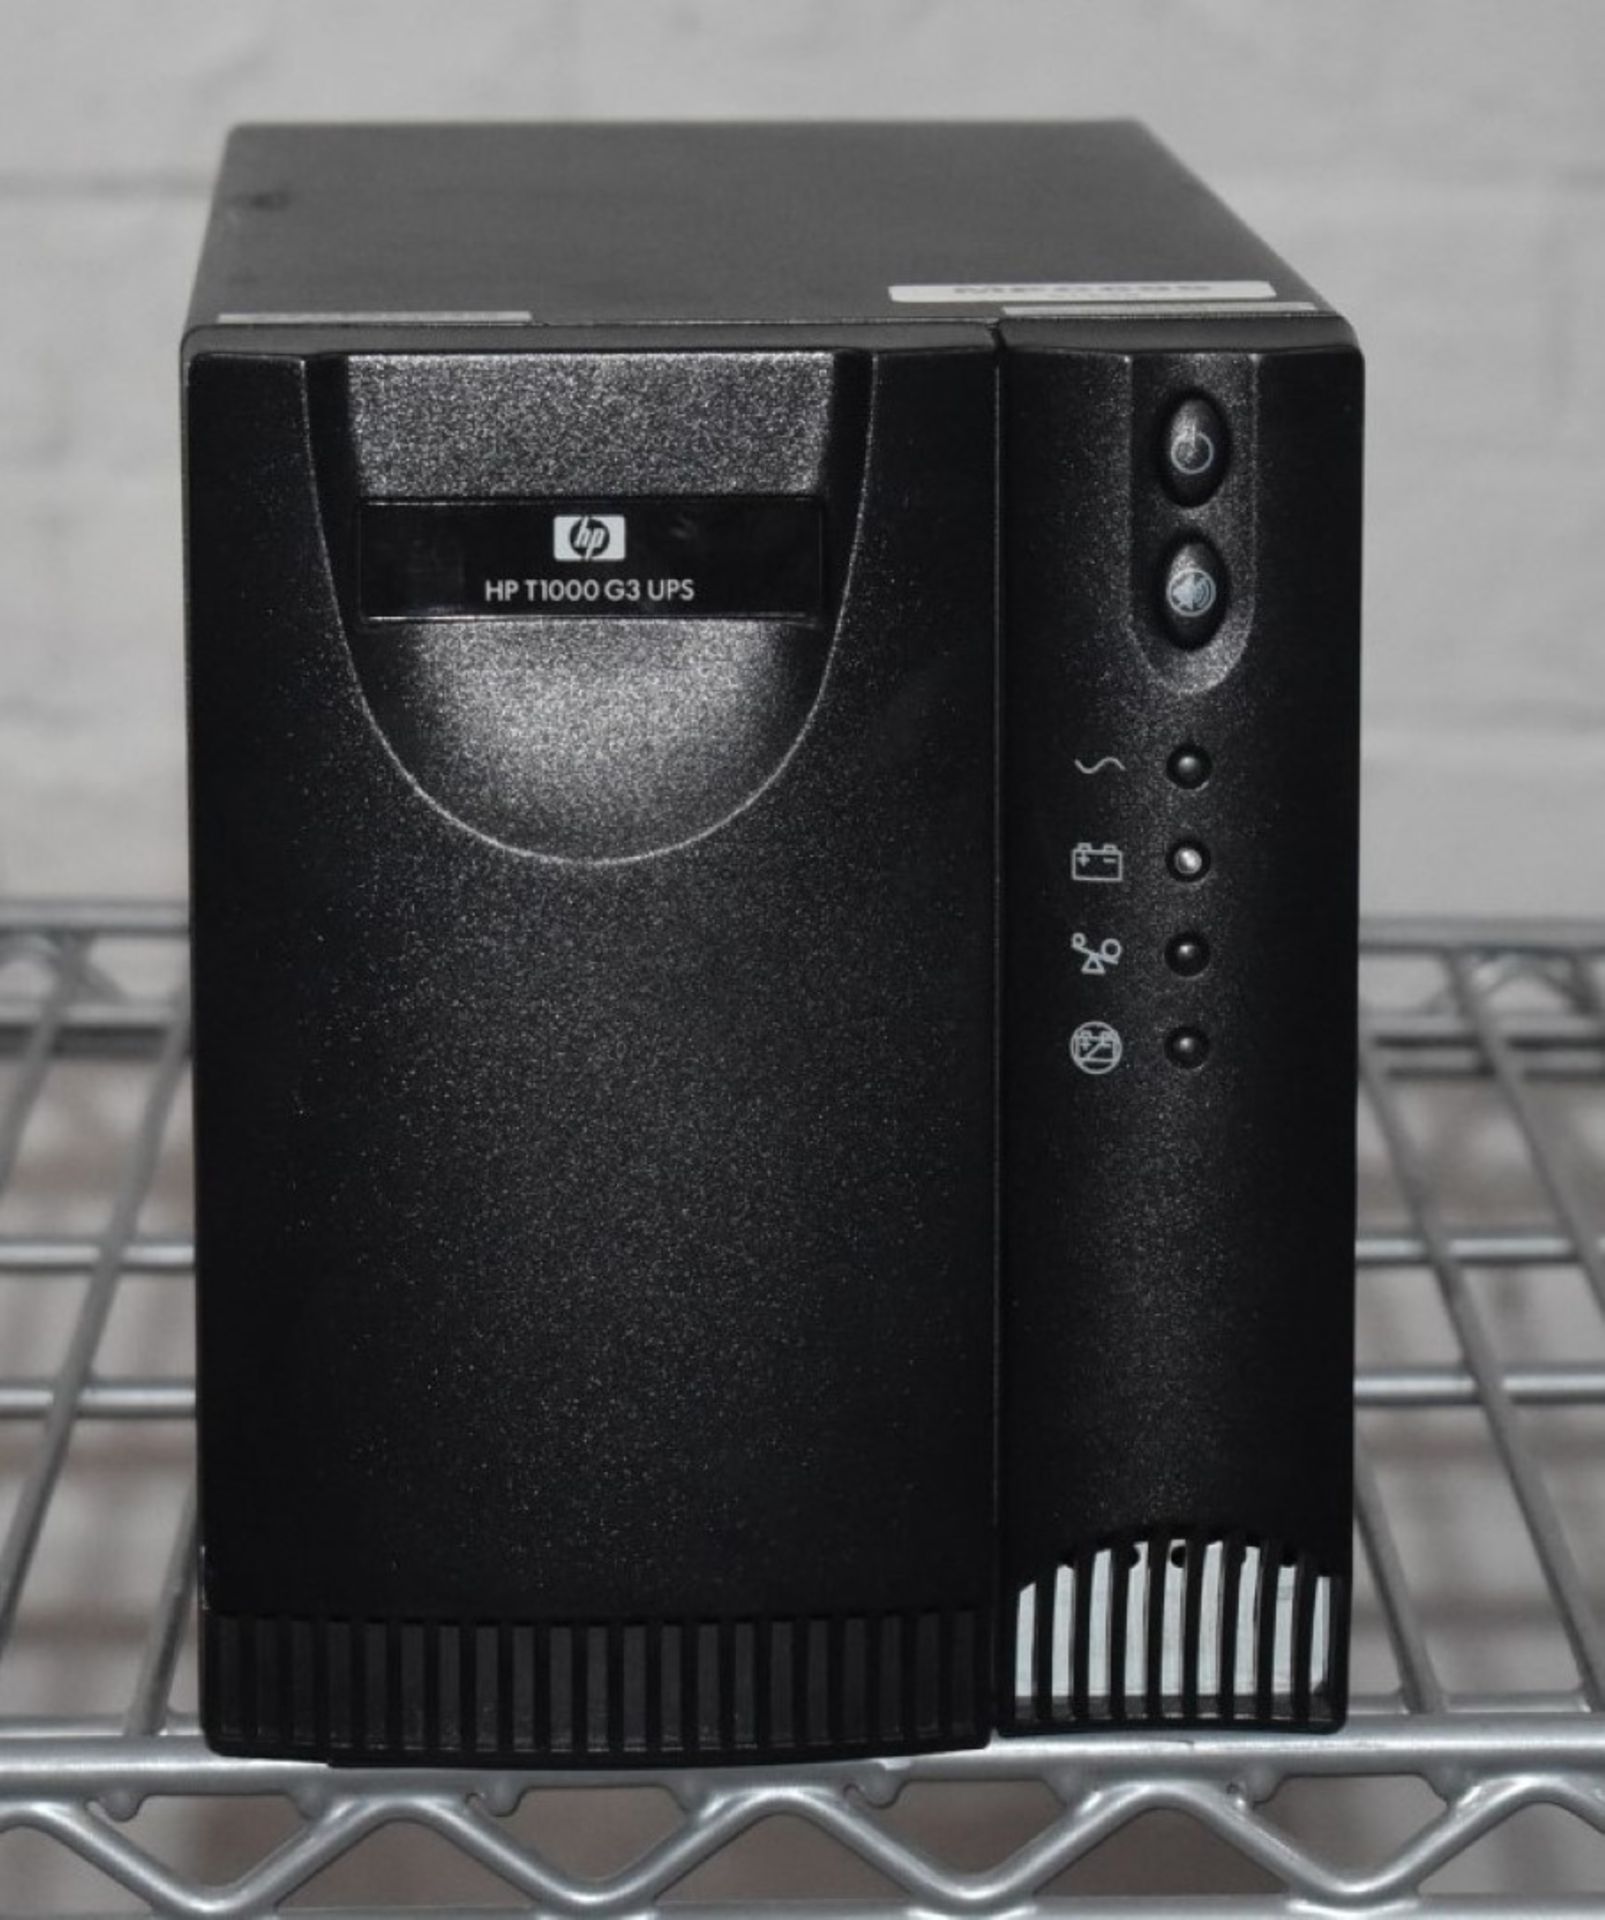 1 x HP T1000 G3 UPS Uninterruptable Power Supply - RRP £249.99 - Ref: MPC699 WH3 - CL011 - Location: - Image 2 of 9